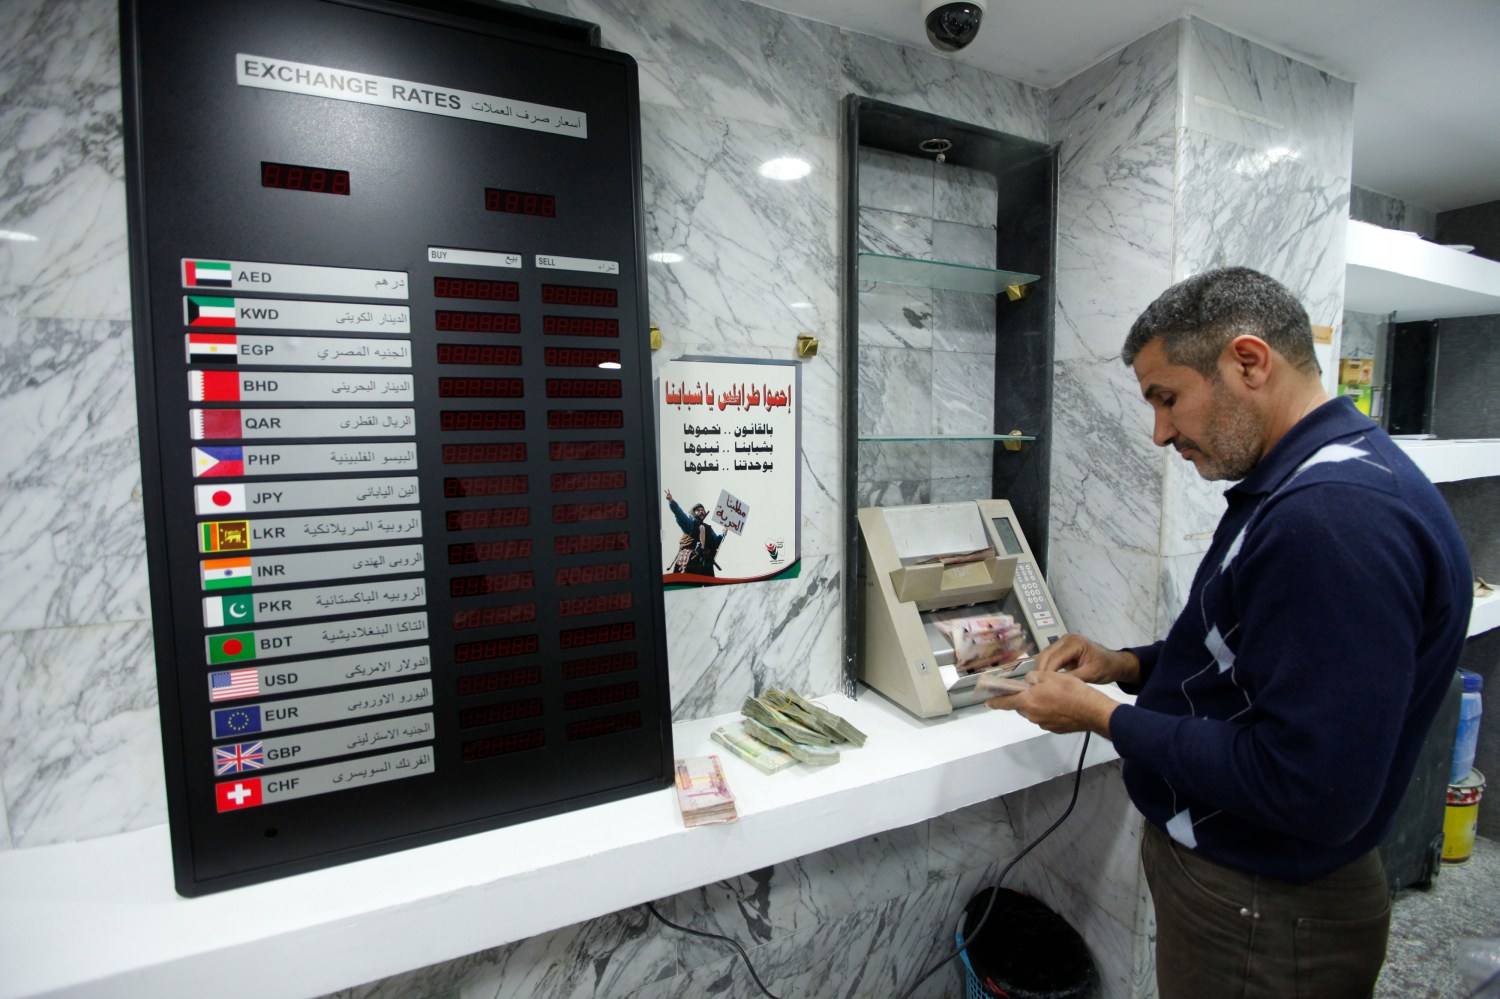 A man uses a currency counting machine to count Libyan dinar at a currency exchange office in central Tripoli March 30, 2014. Libya is burning through central bank reserves and scrapping infrastructure projects to overcome its worst budget crisis in decades after the seizure of oil installations by armed groups has reduced the government's income almost to zero. Picture taken March 30, 2014. REUTERS/Ismail Zitouny (LIBYA - Tags: POLITICS CIVIL UNREST BUSINESS) - RTR3JBYF